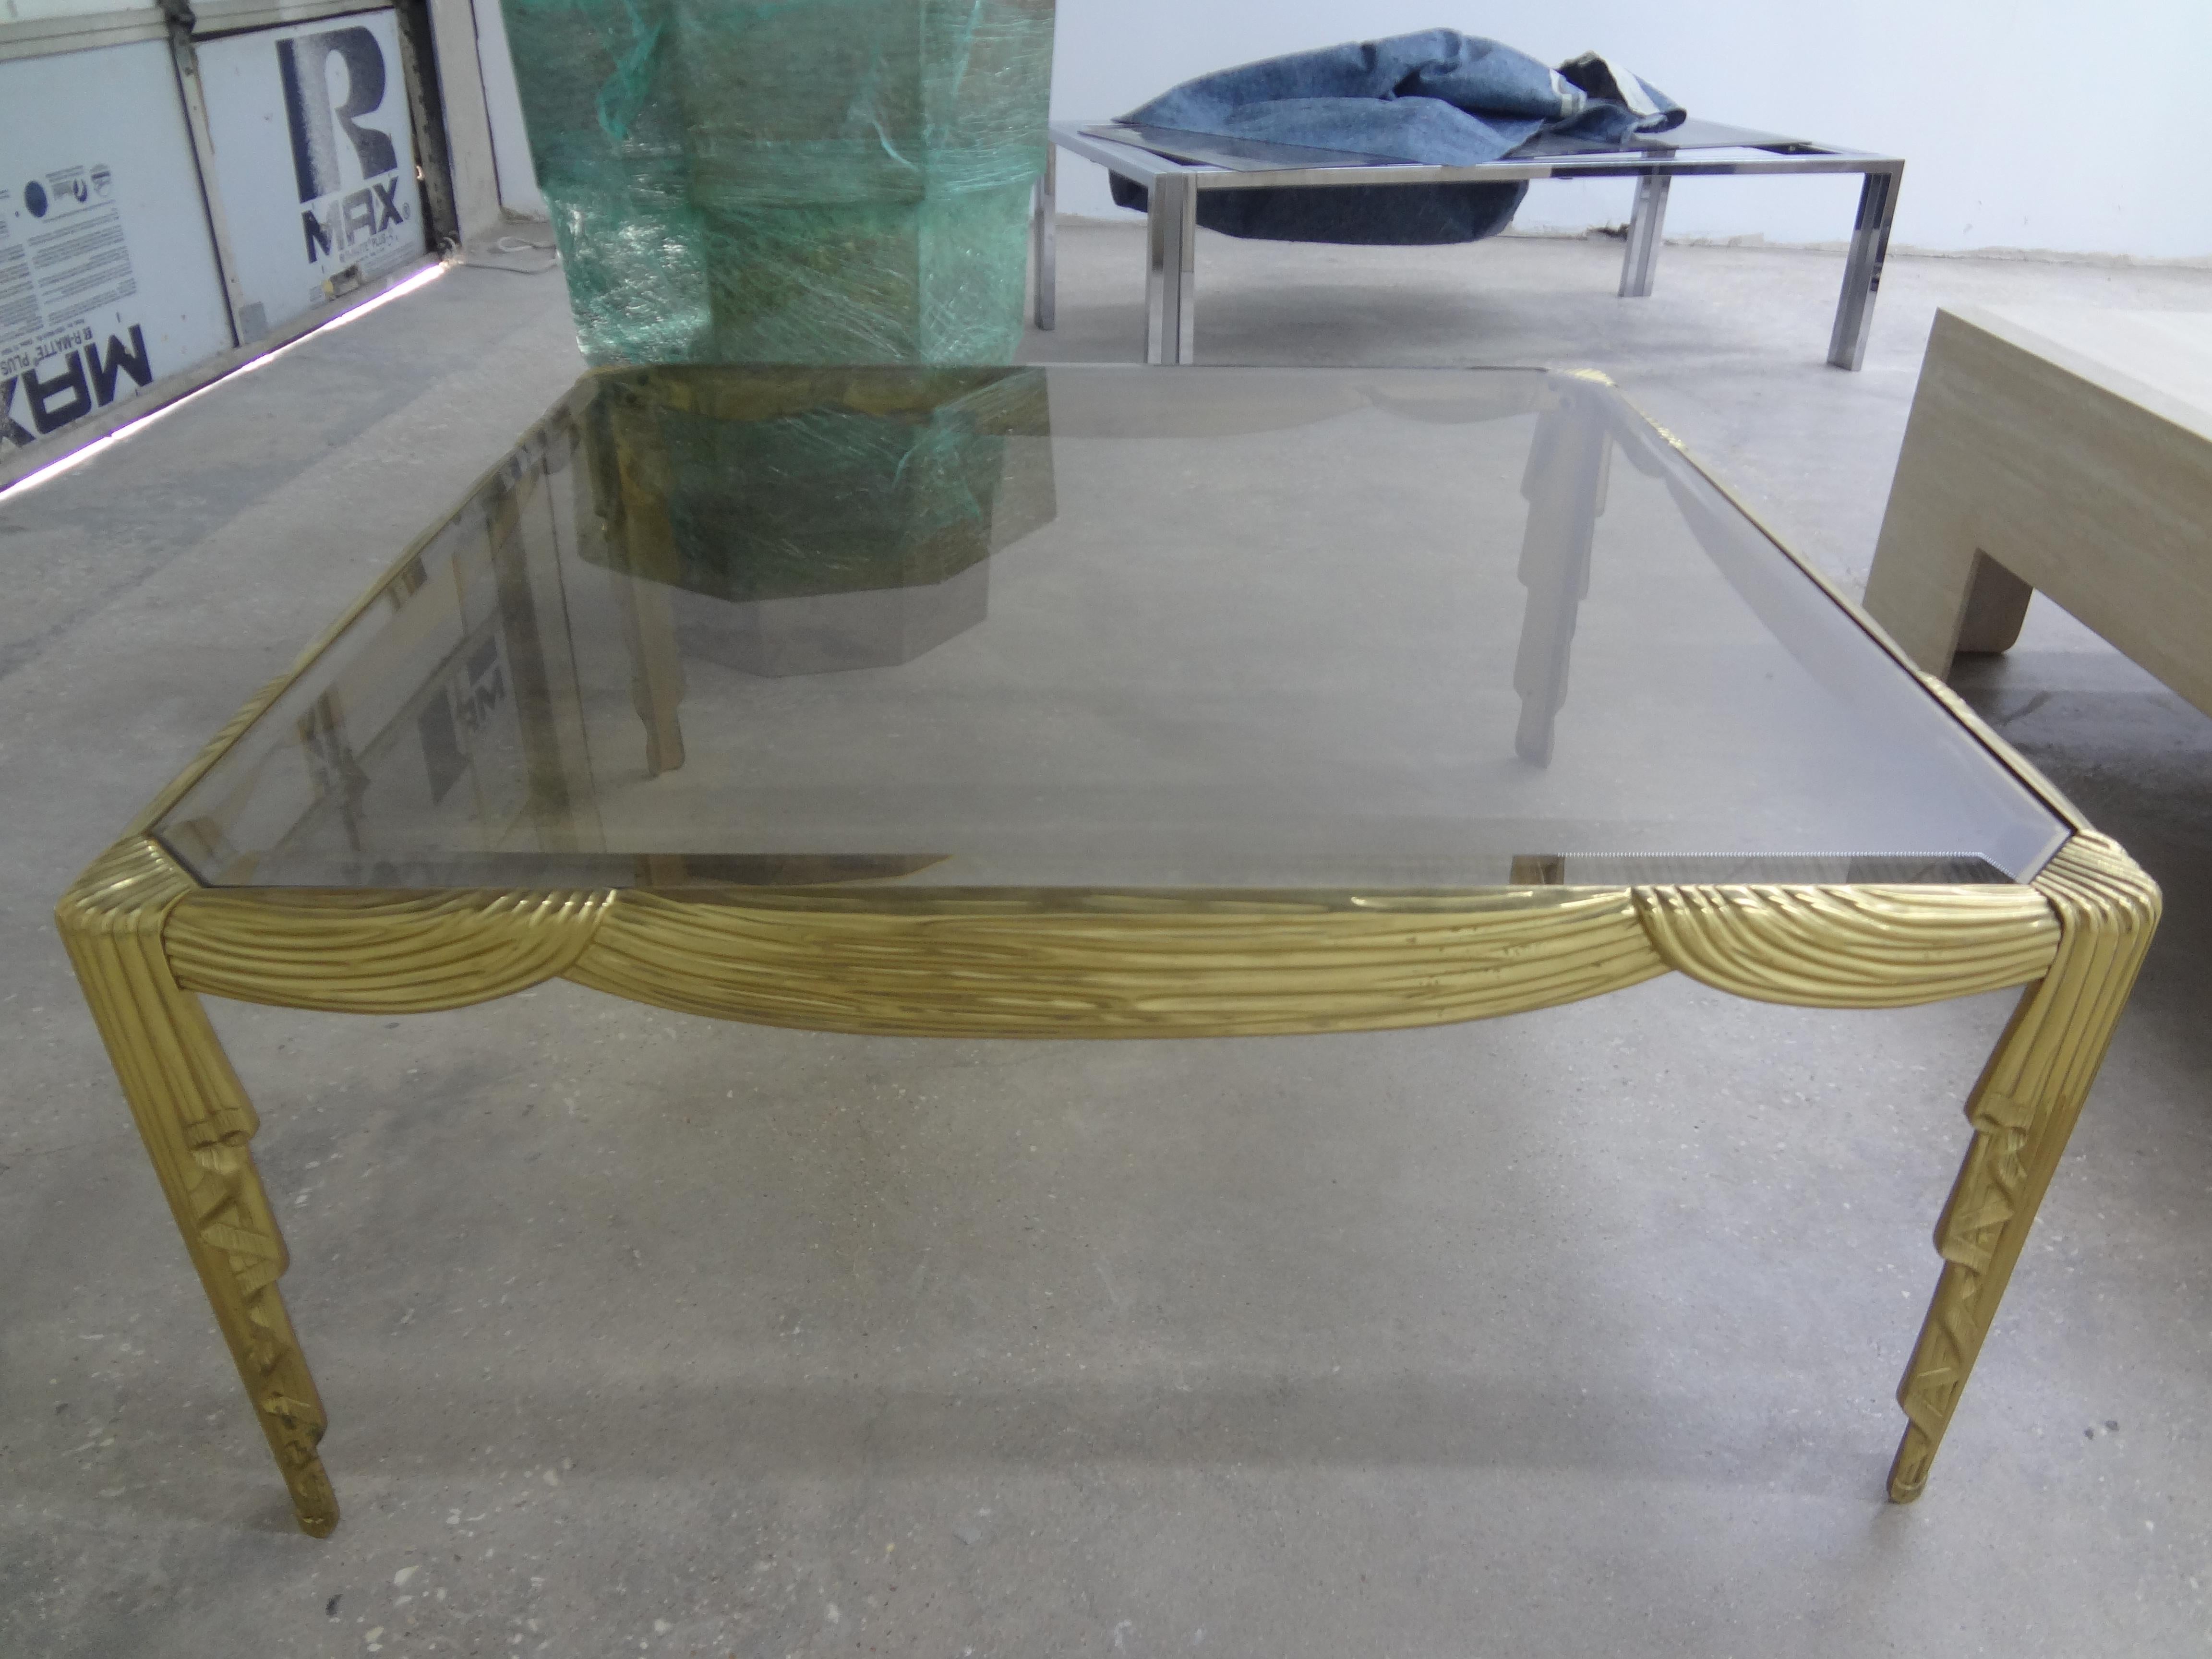 Italian brass coffee table with draped design. This lovely Italian modern / Hollywood Regency square brass coffee table or cocktail table has great draped swags on all sides and legs. It currently has a light colored beveled smoked glass top which